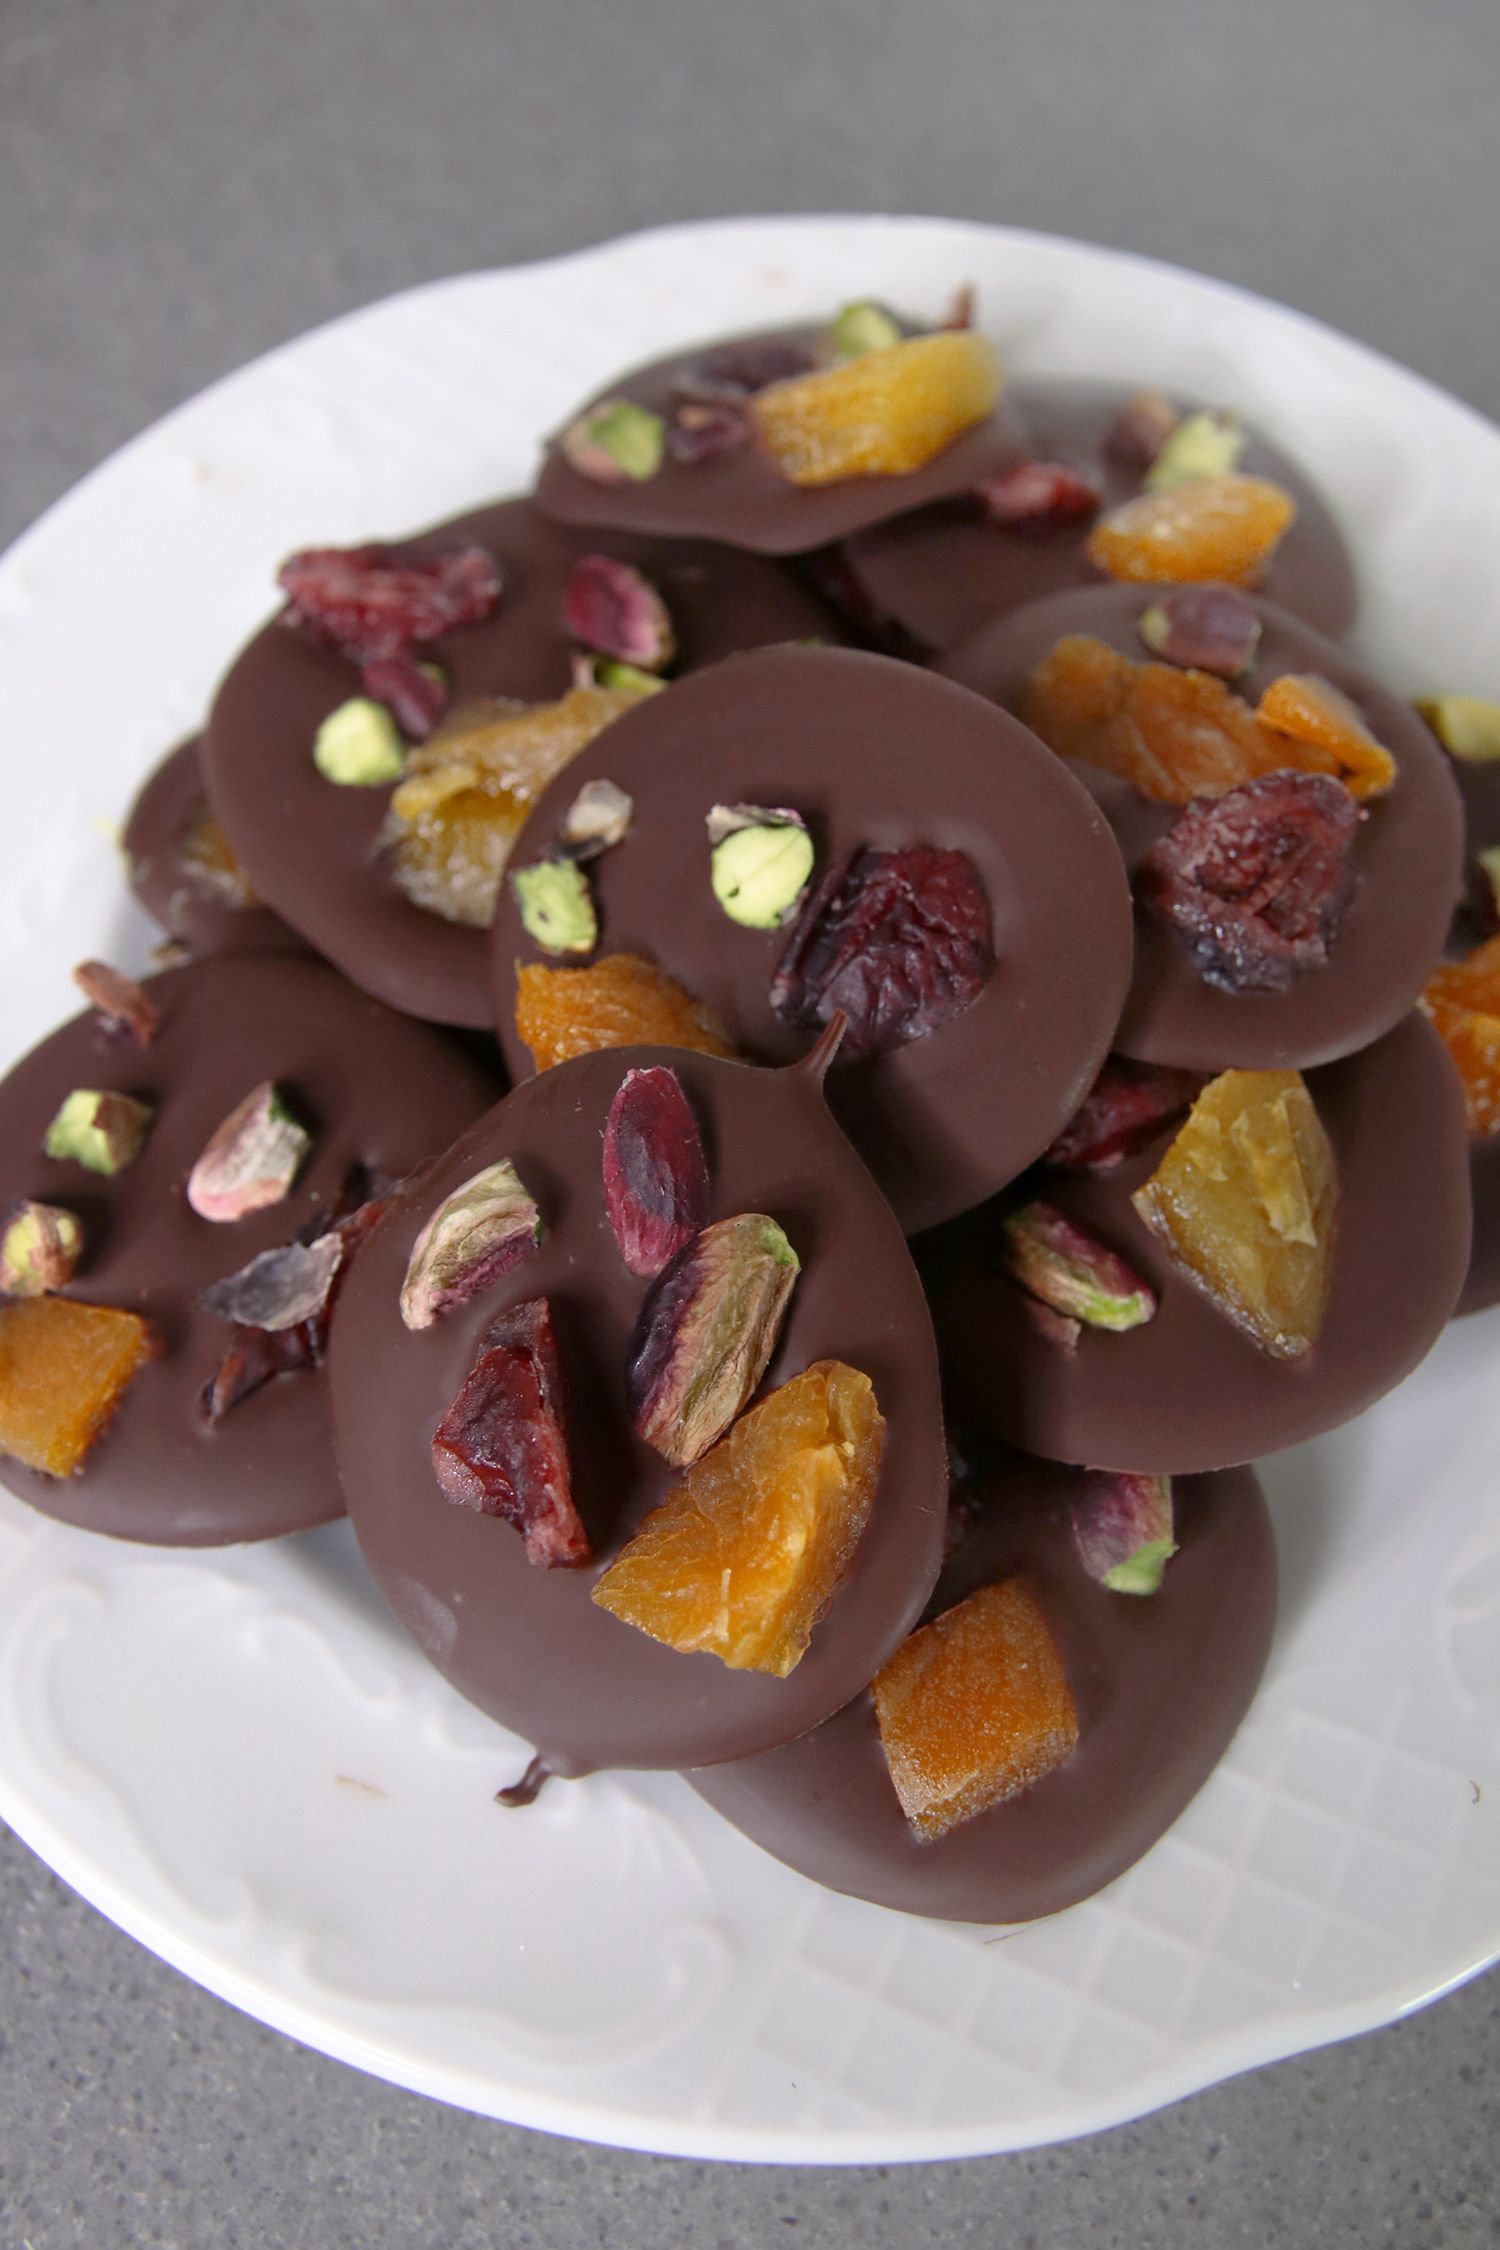 Chocolate Bars with Dried Fruits and Nuts